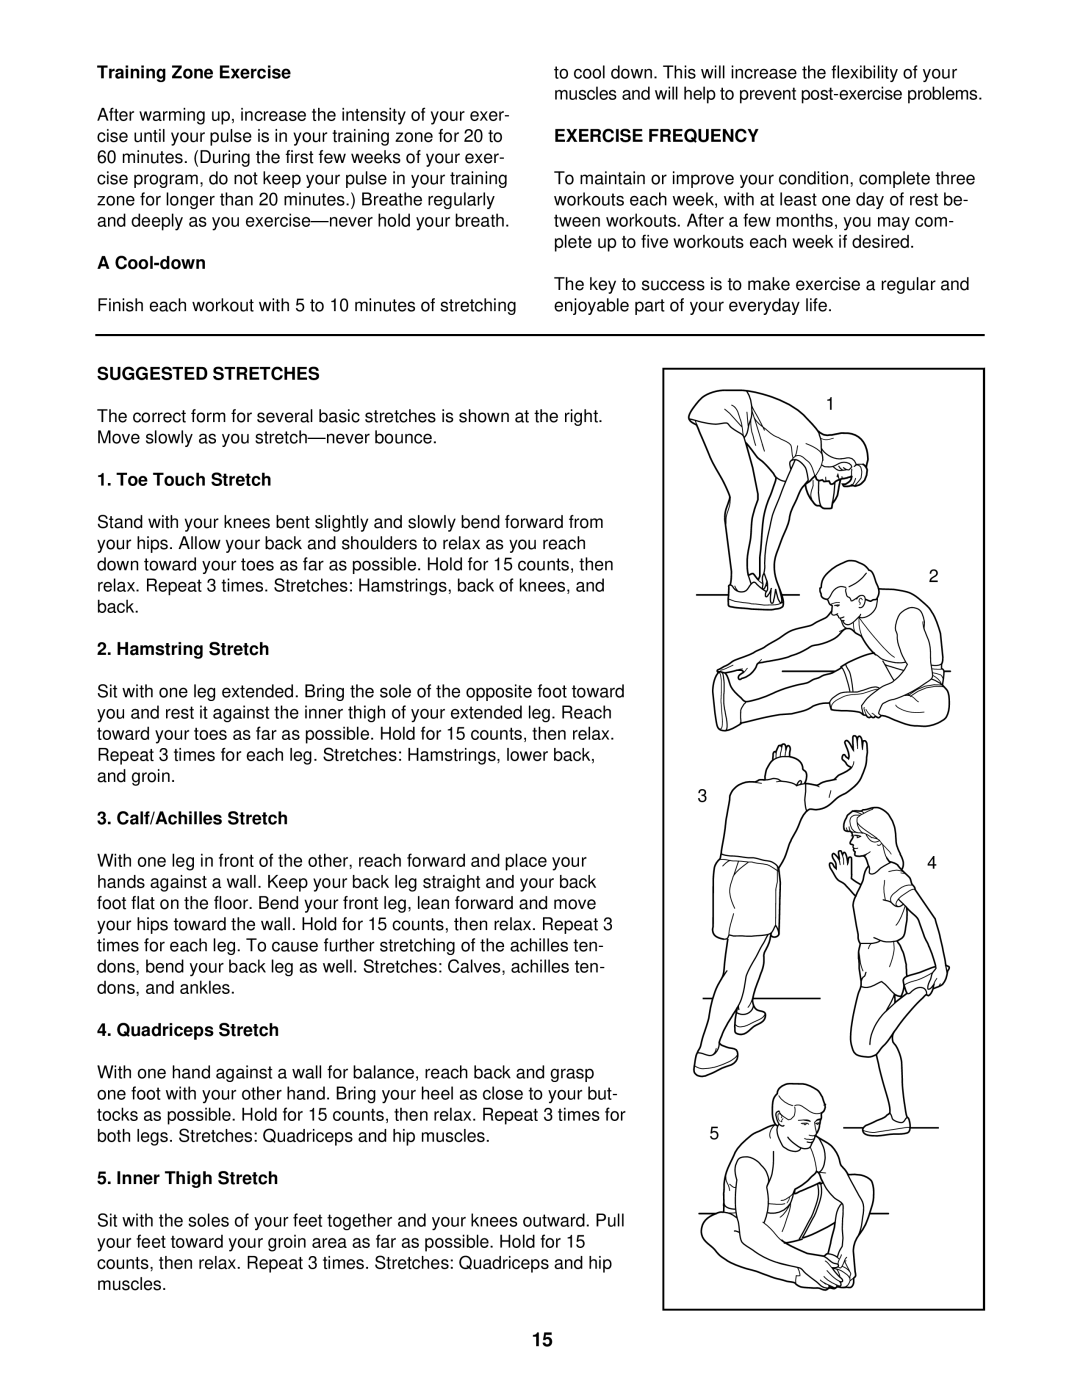 Weslo WCTL38410 user manual Training Zone Exercise, A Cool-down, Exercise Frequency, Suggested Stretches, Toe Touch Stretch 